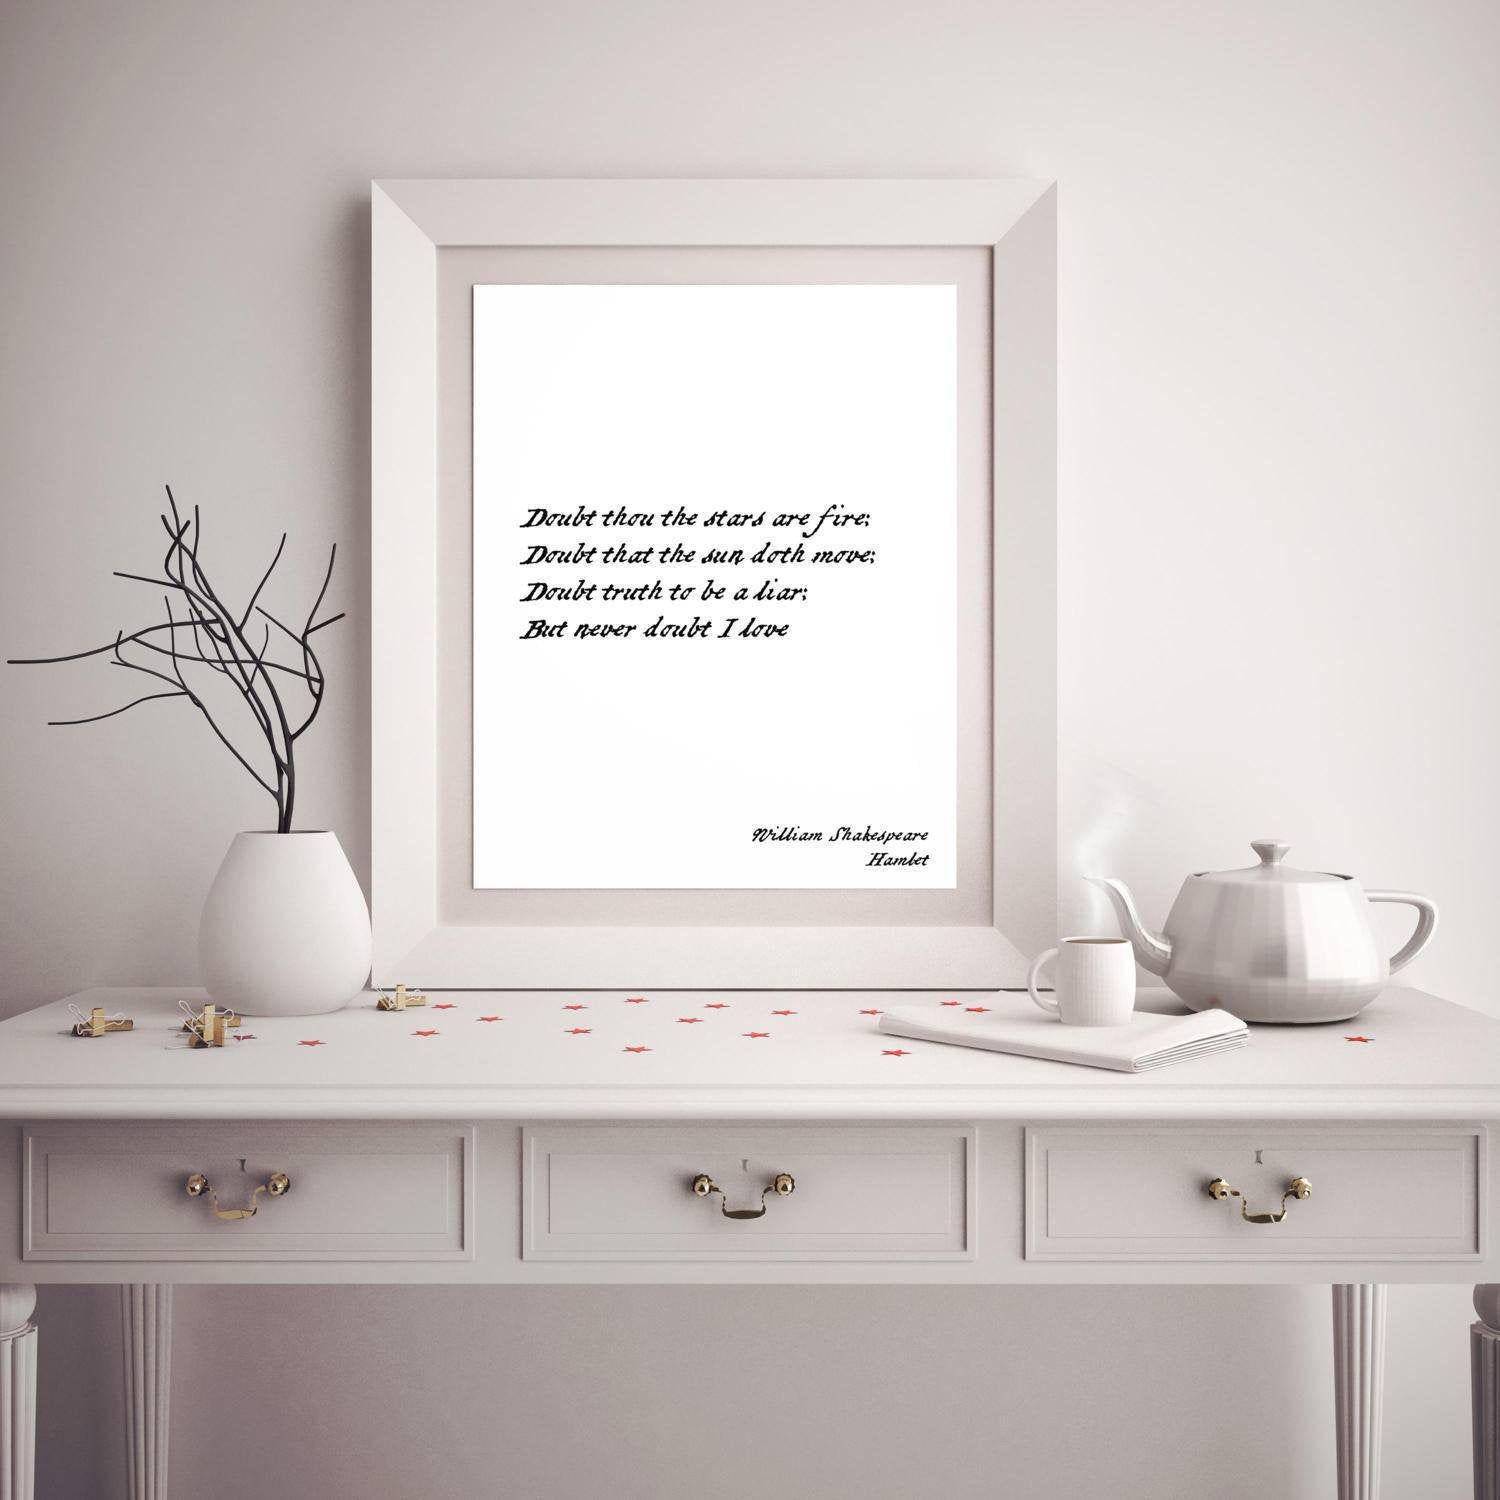 Never Doubt I Love Shakespeare Quote from Hamlet, Romantic Wall Art Prints in Black & White Unframed - BookQuoteDecor